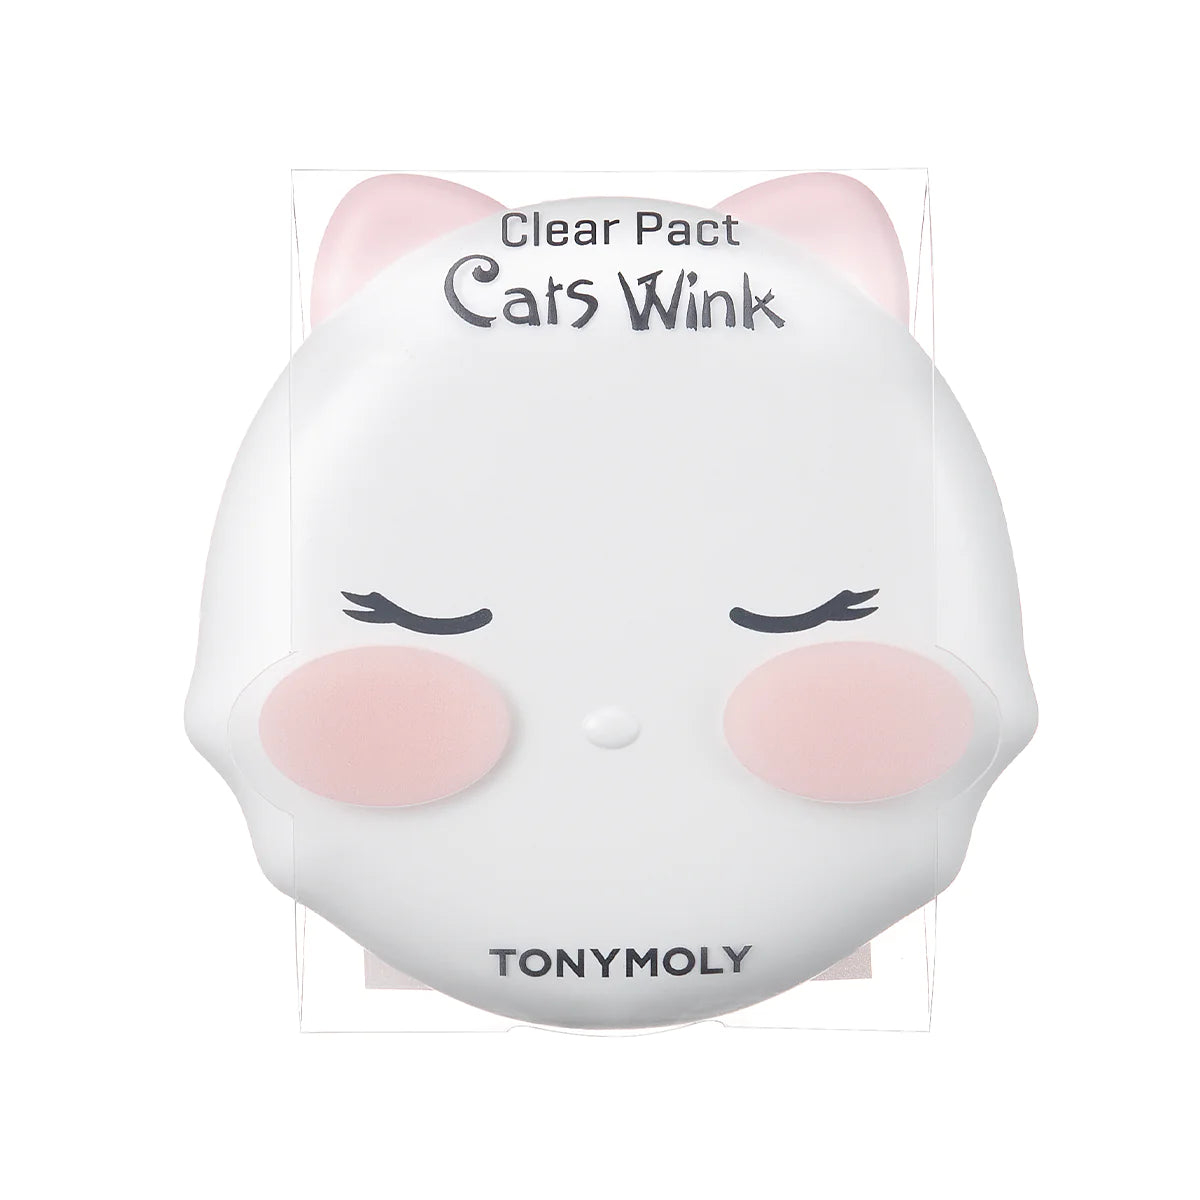 Cats Wink Clear Pact